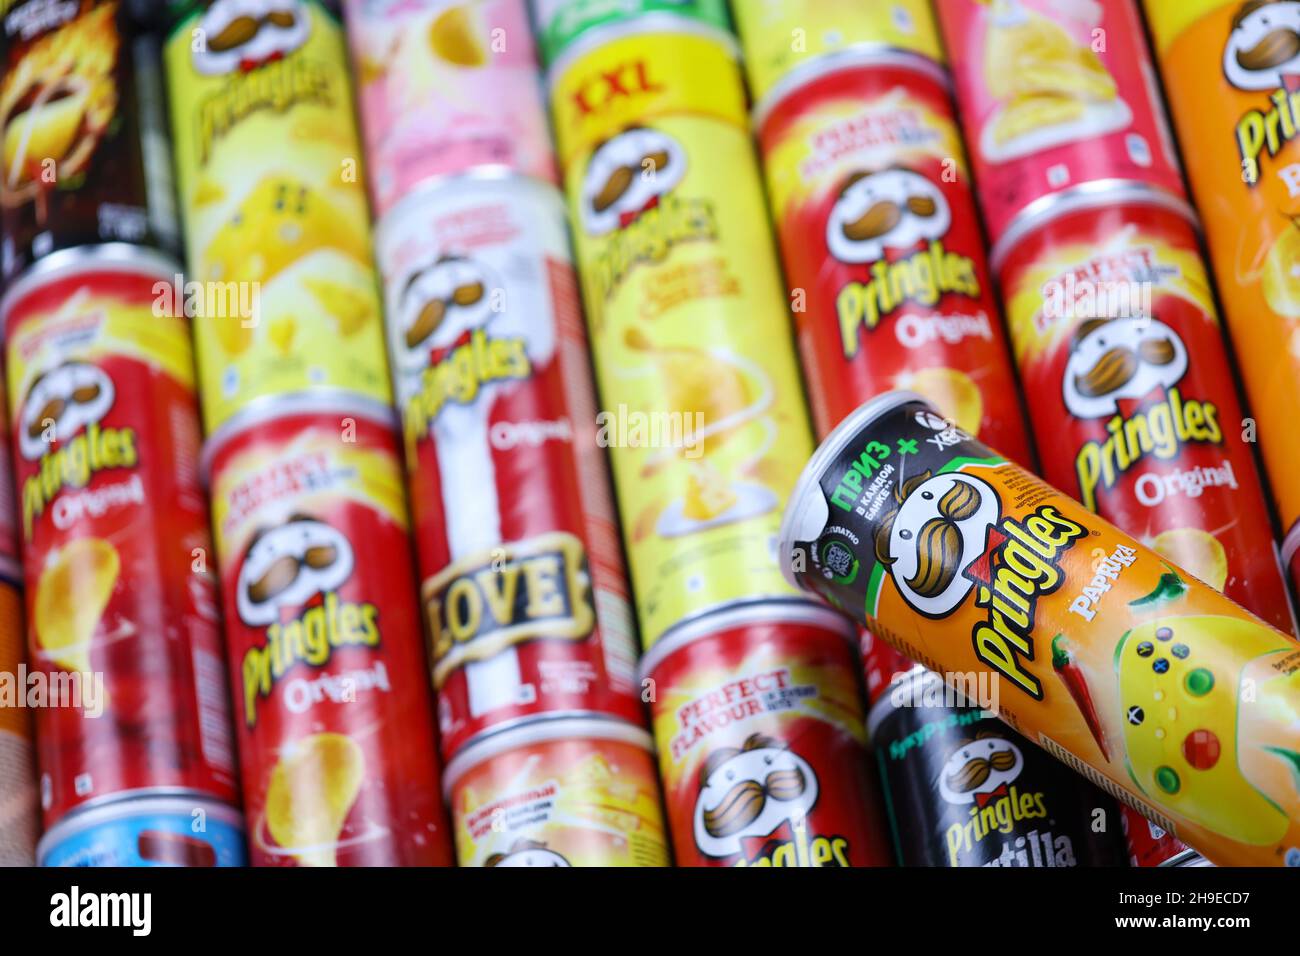 KHARKOV, UKRAINE - MARCH 30, 2021: Many Pringles cylinder chips boxes with varios colors and flavours. American brand of stackable potato-based crisps Stock Photo